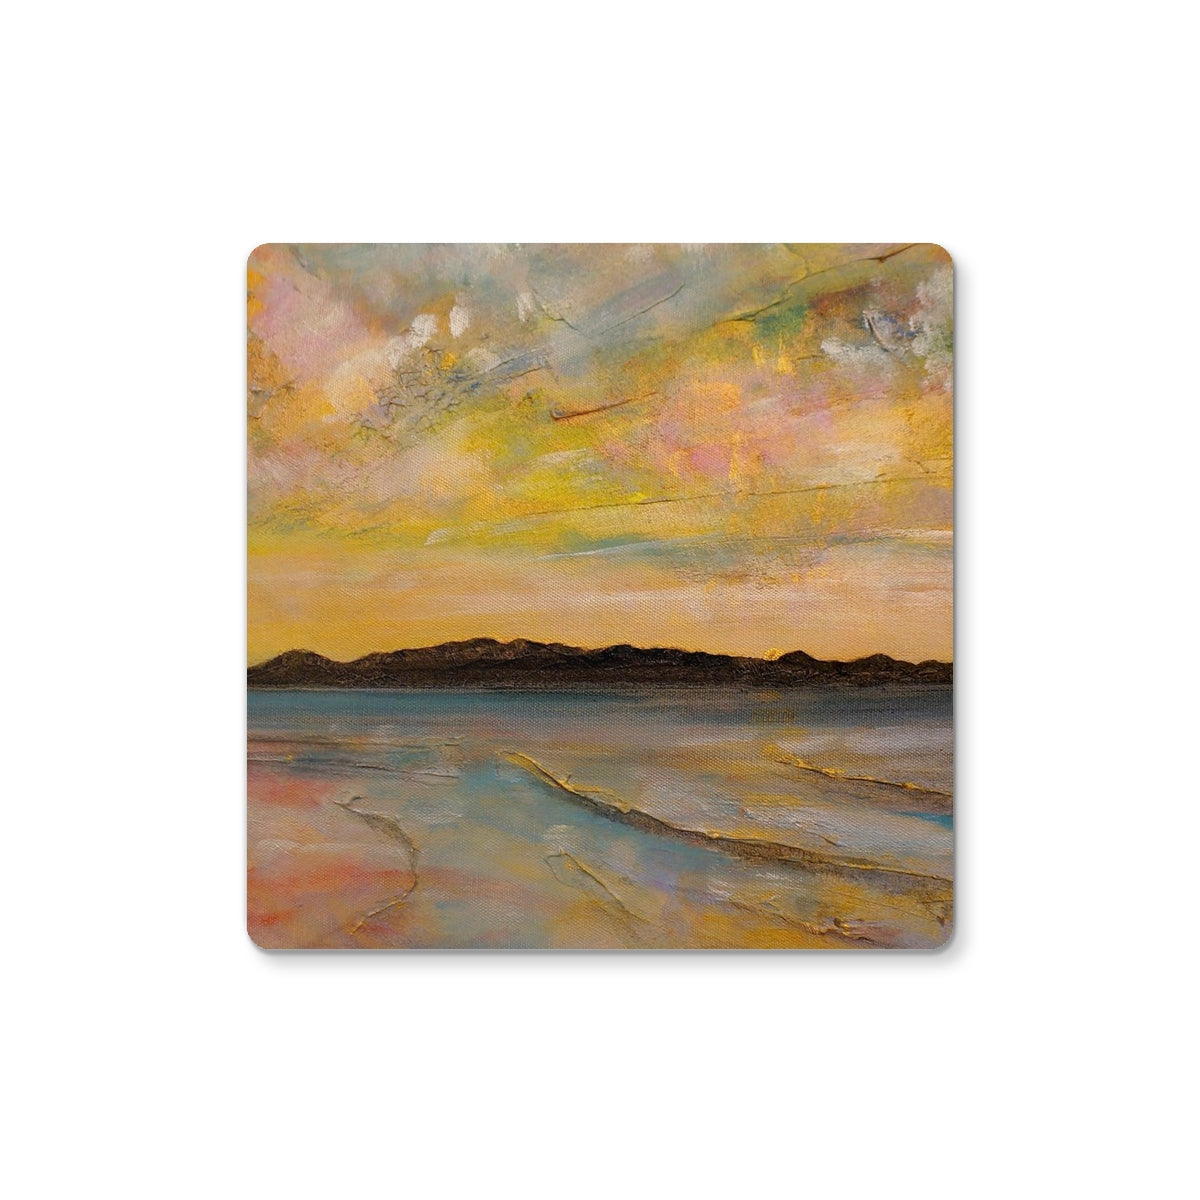 Vallay Island North Uist Art Gifts Coaster-Coasters-Hebridean Islands Art Gallery-Single Coaster-Paintings, Prints, Homeware, Art Gifts From Scotland By Scottish Artist Kevin Hunter